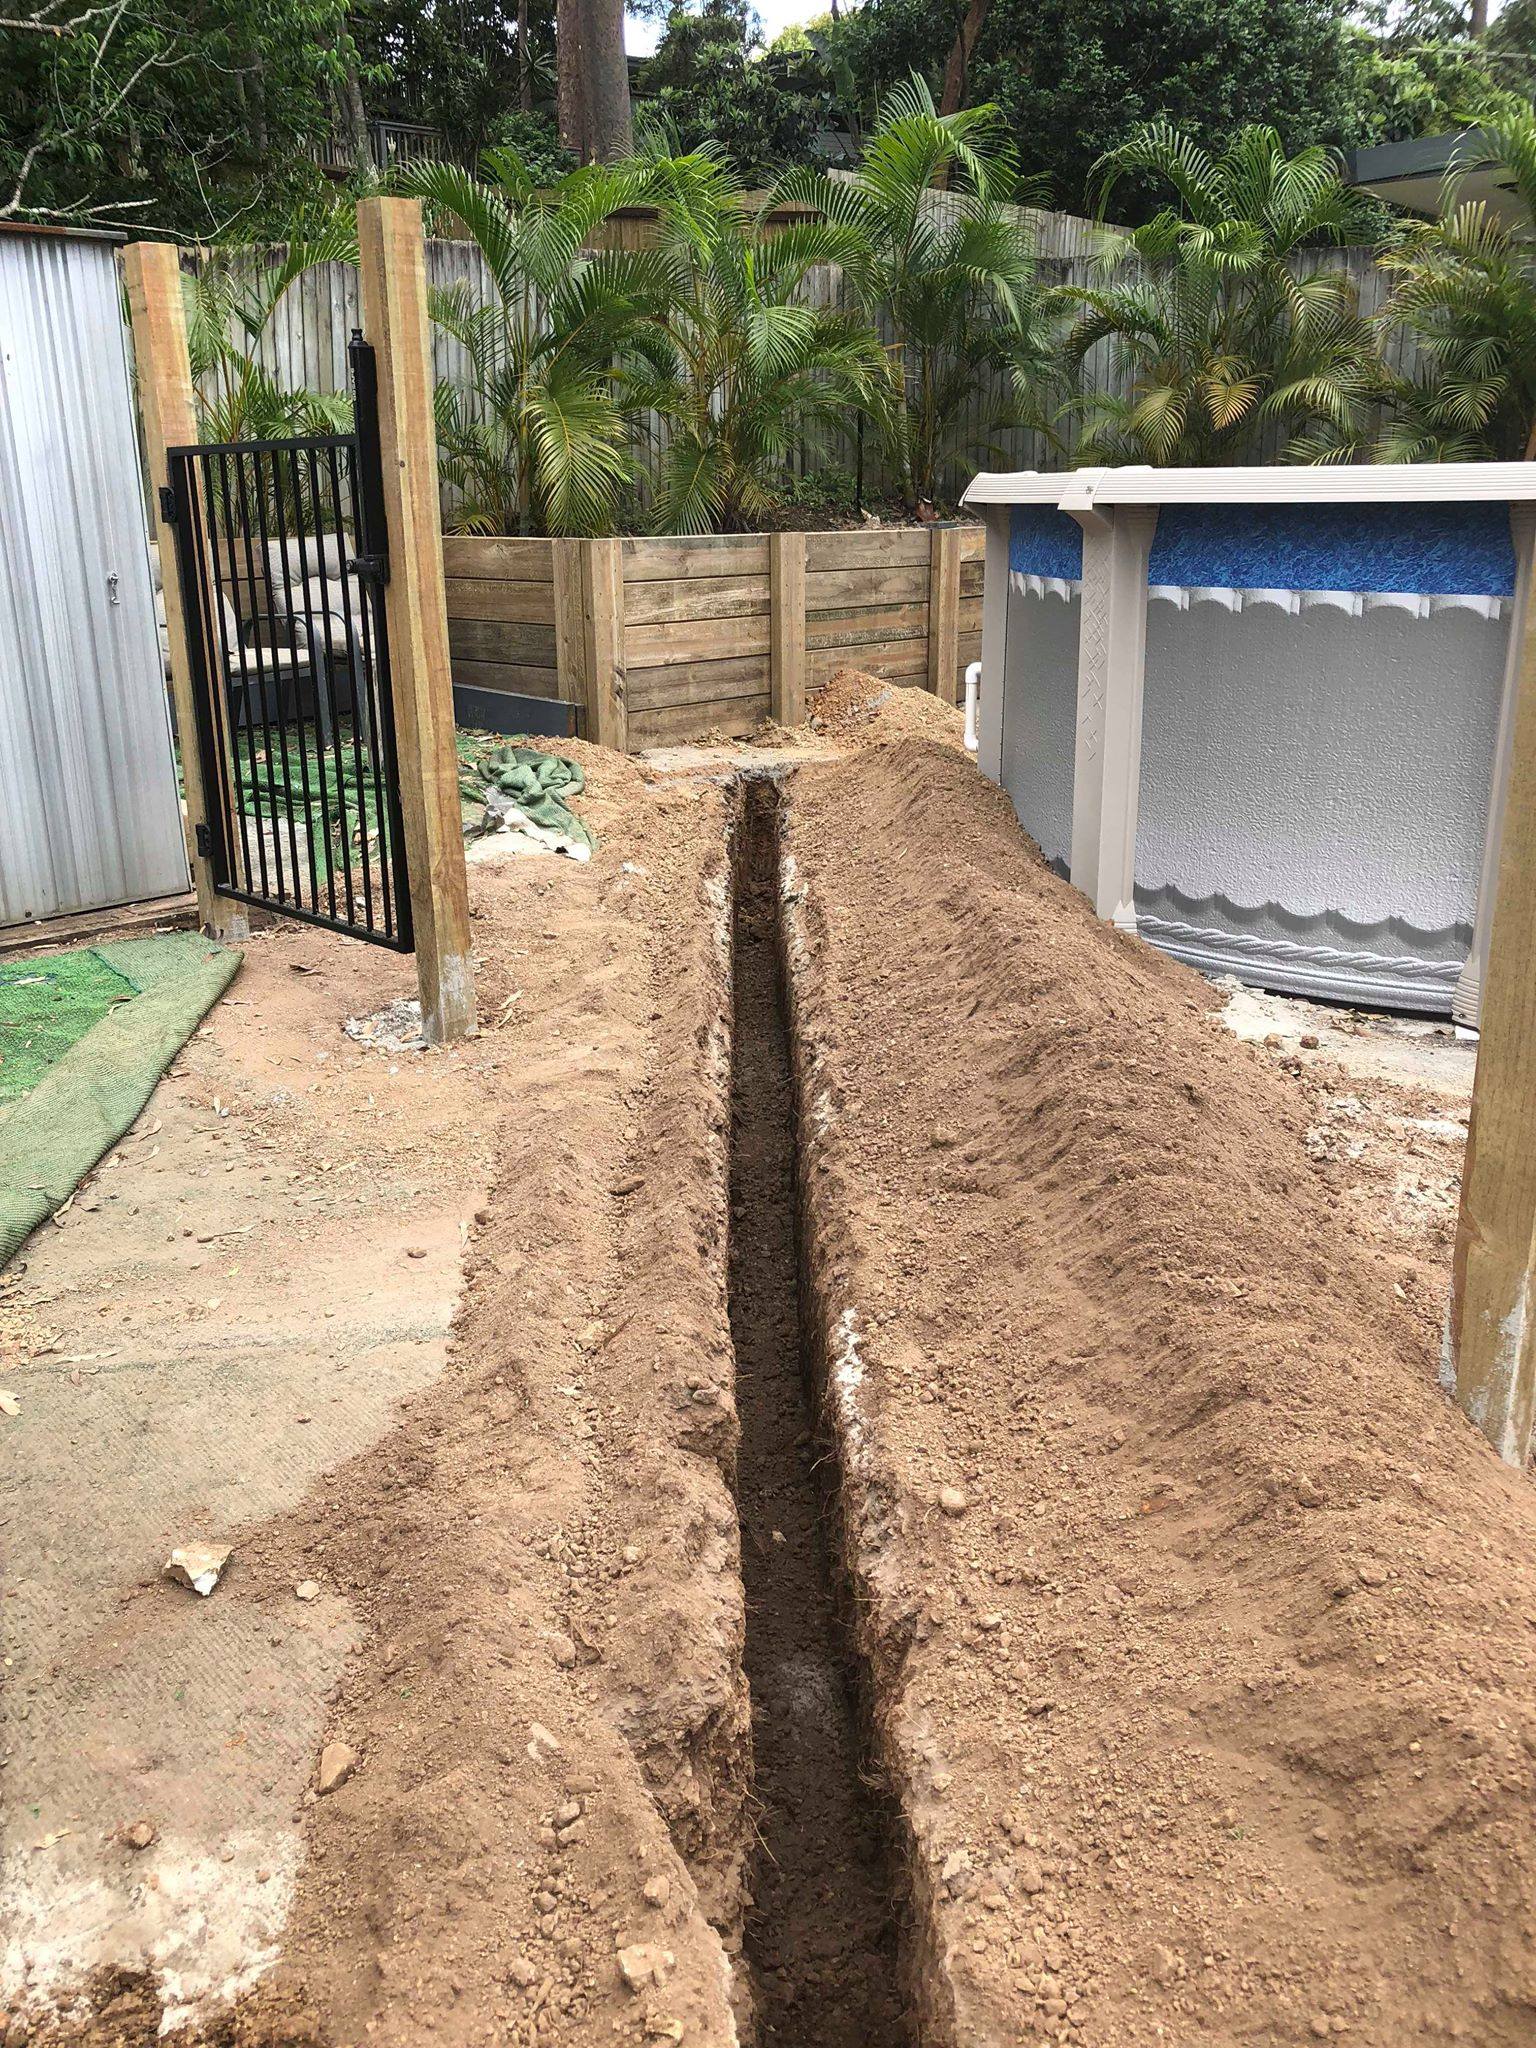 Challenging trench complete. This yard had the hardest ground we've hit yet